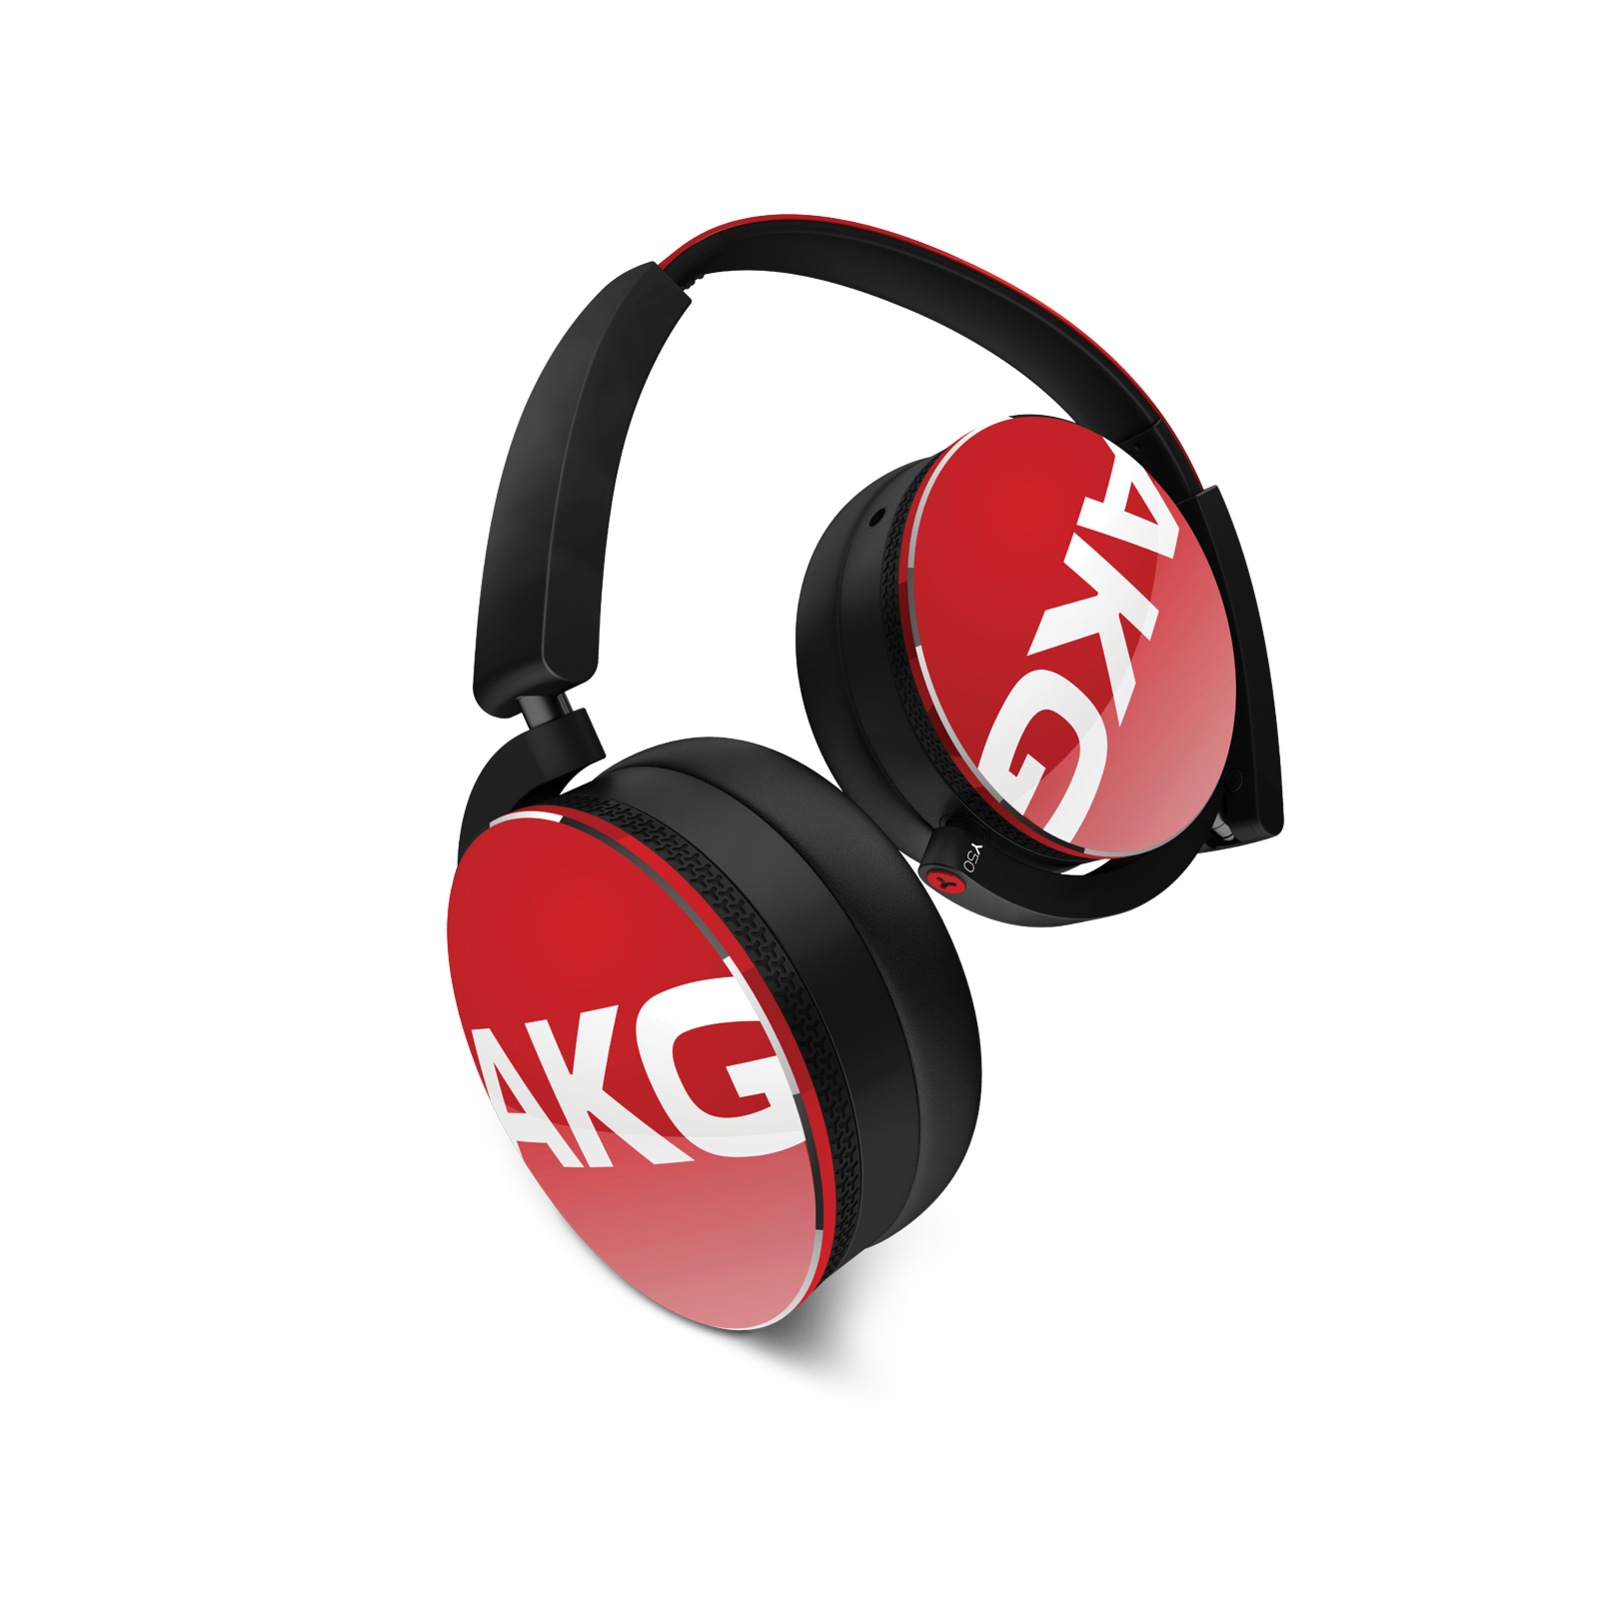 Y50 - Red - On-ear headphones with AKG-quality sound, smart styling, snug fit and detachable cable with in-line remote/mic - Hero